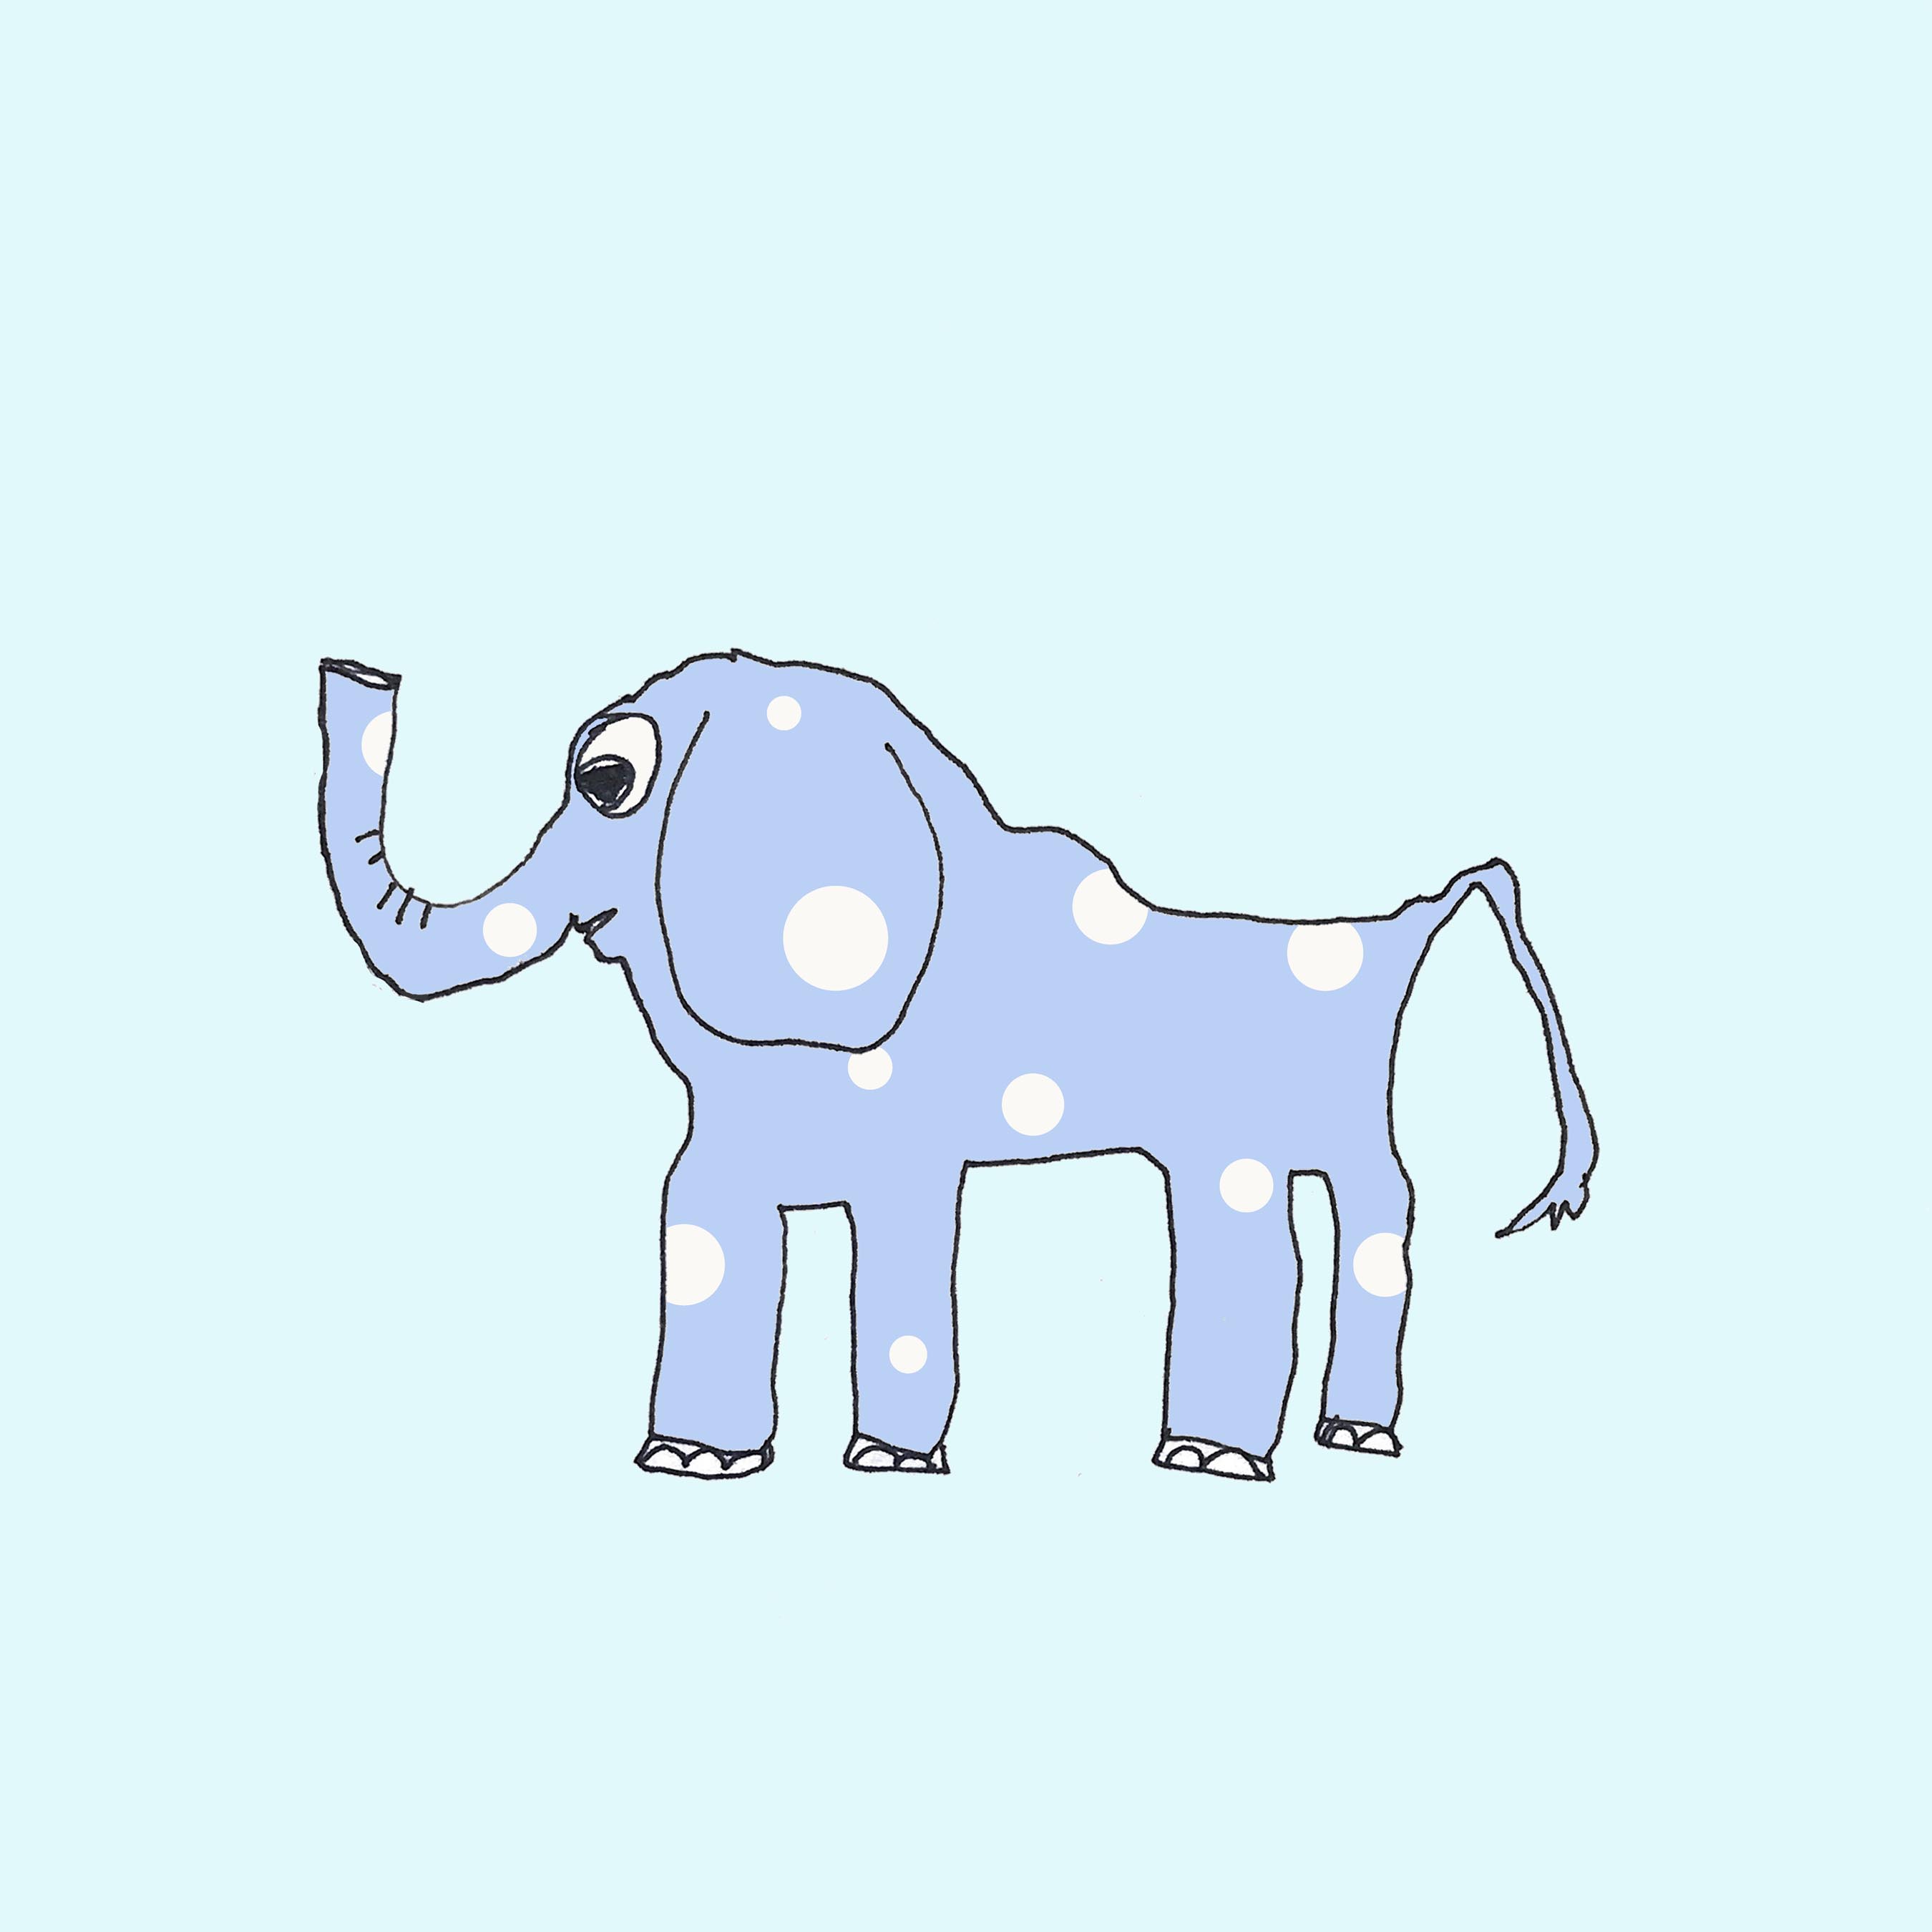 art every day number 513 elephant 2 illustration drawing spotted elephant